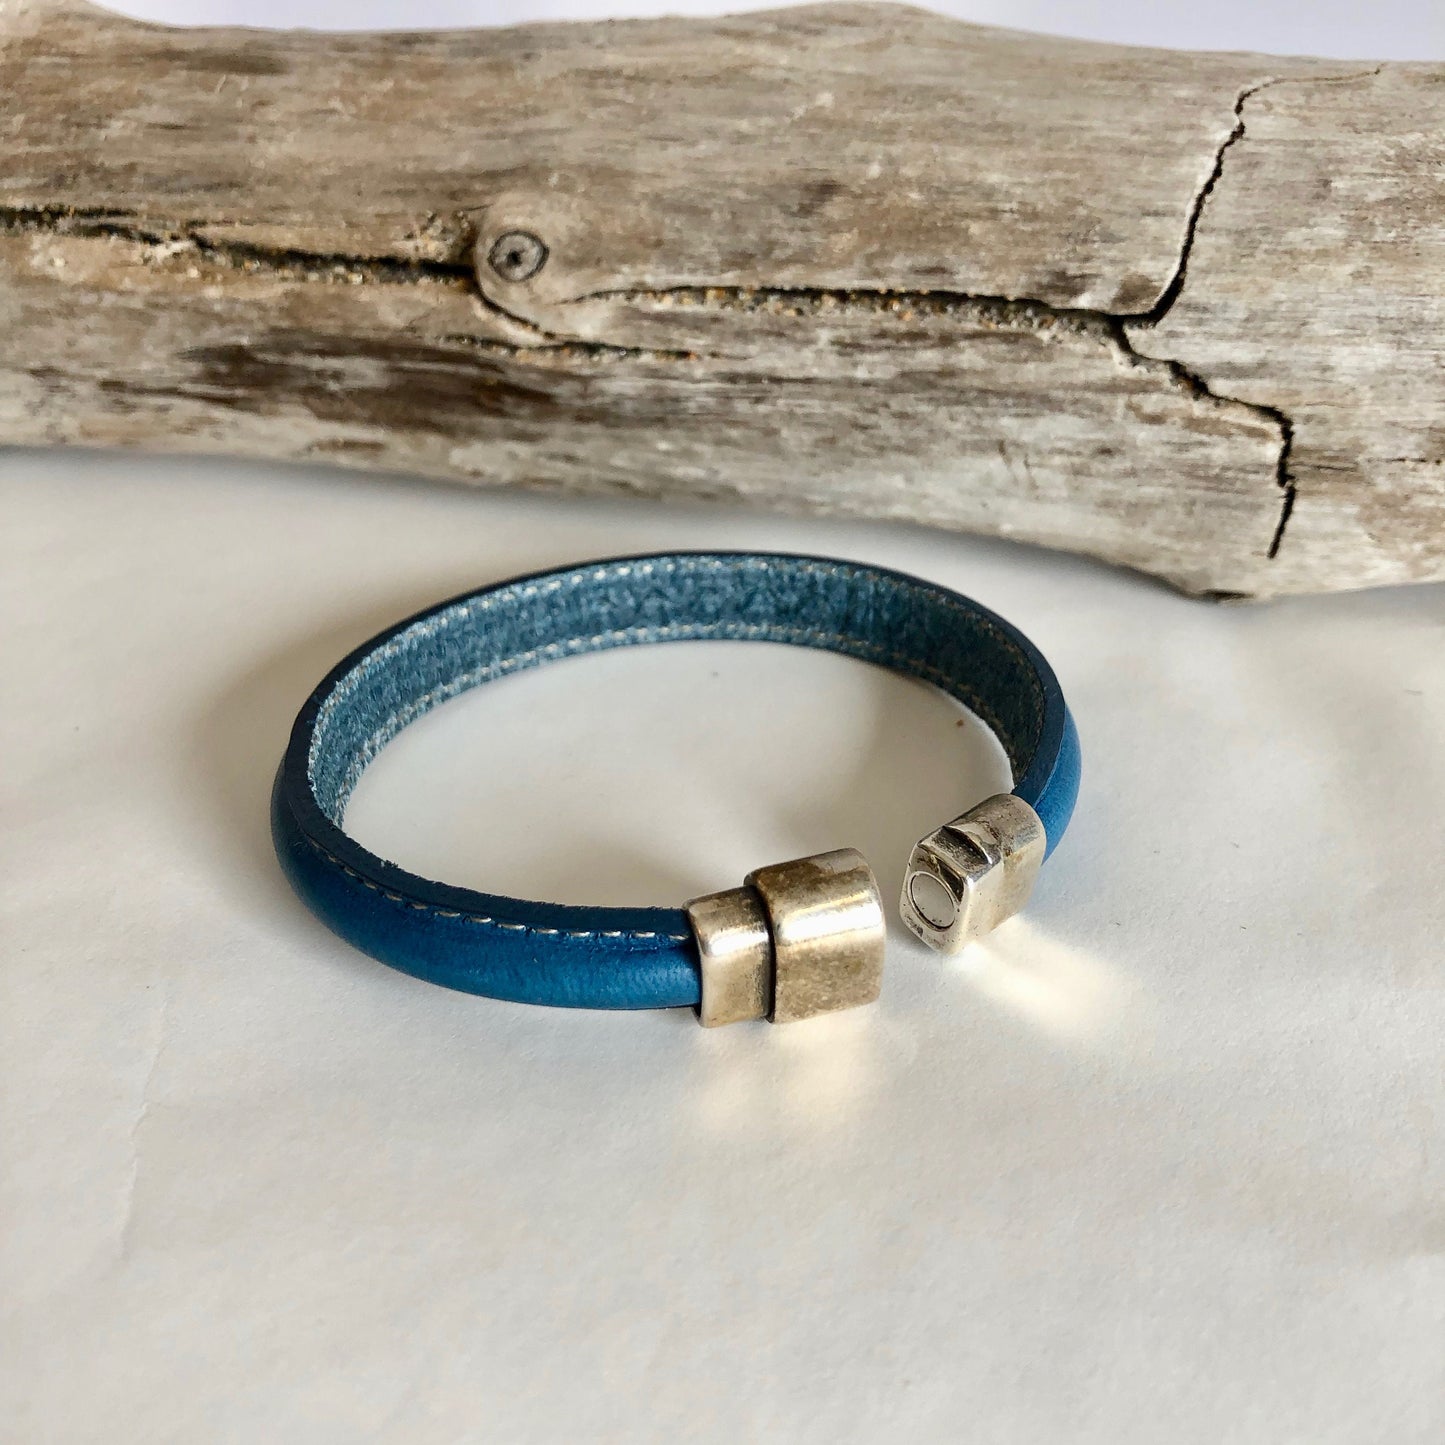 Leather bracelet, made of fine teal color Italian half- licorice leather, finished with a quality silver magnetic bullet style clasp.